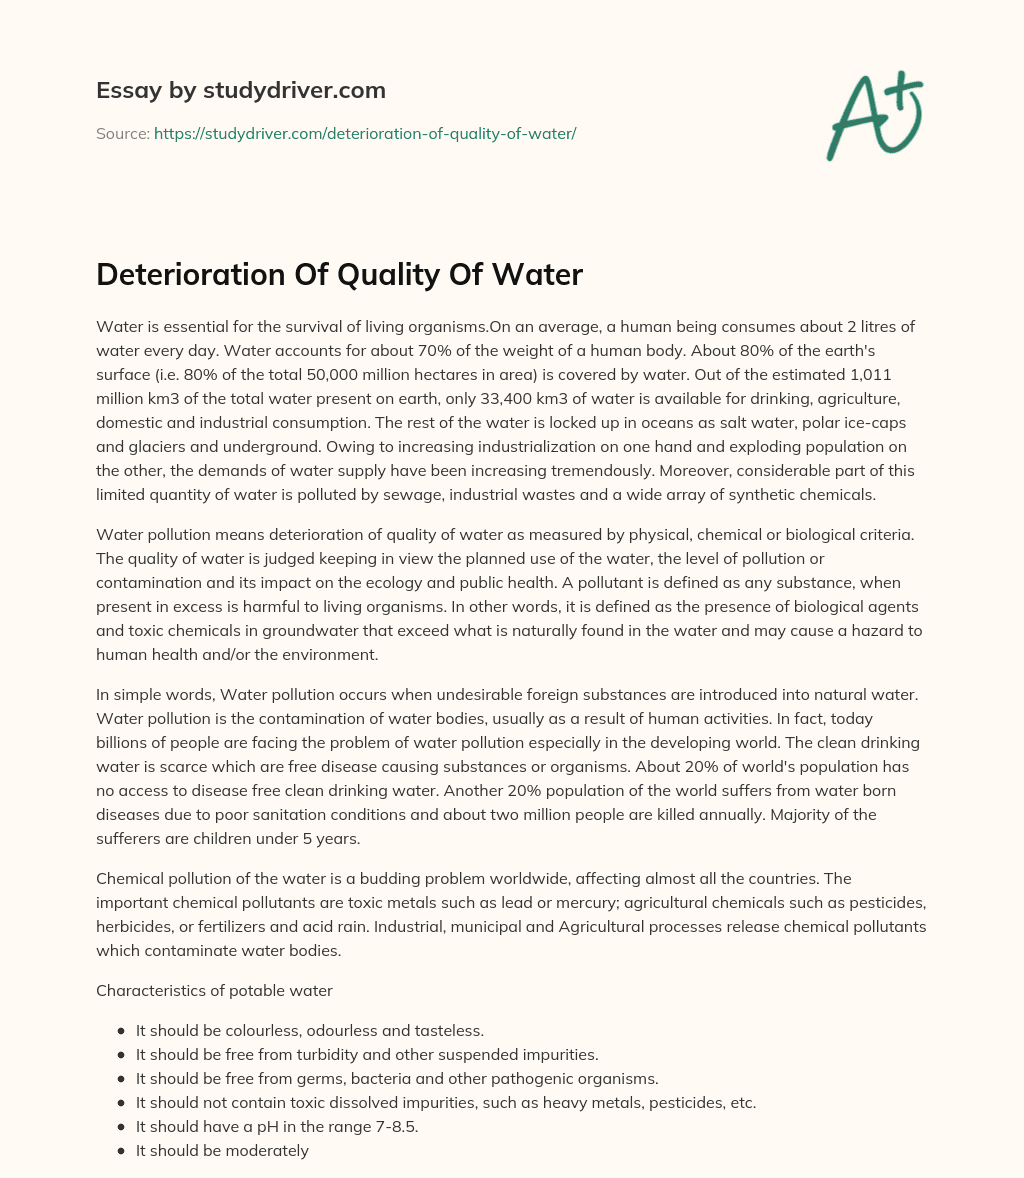 Deterioration of Quality of Water essay